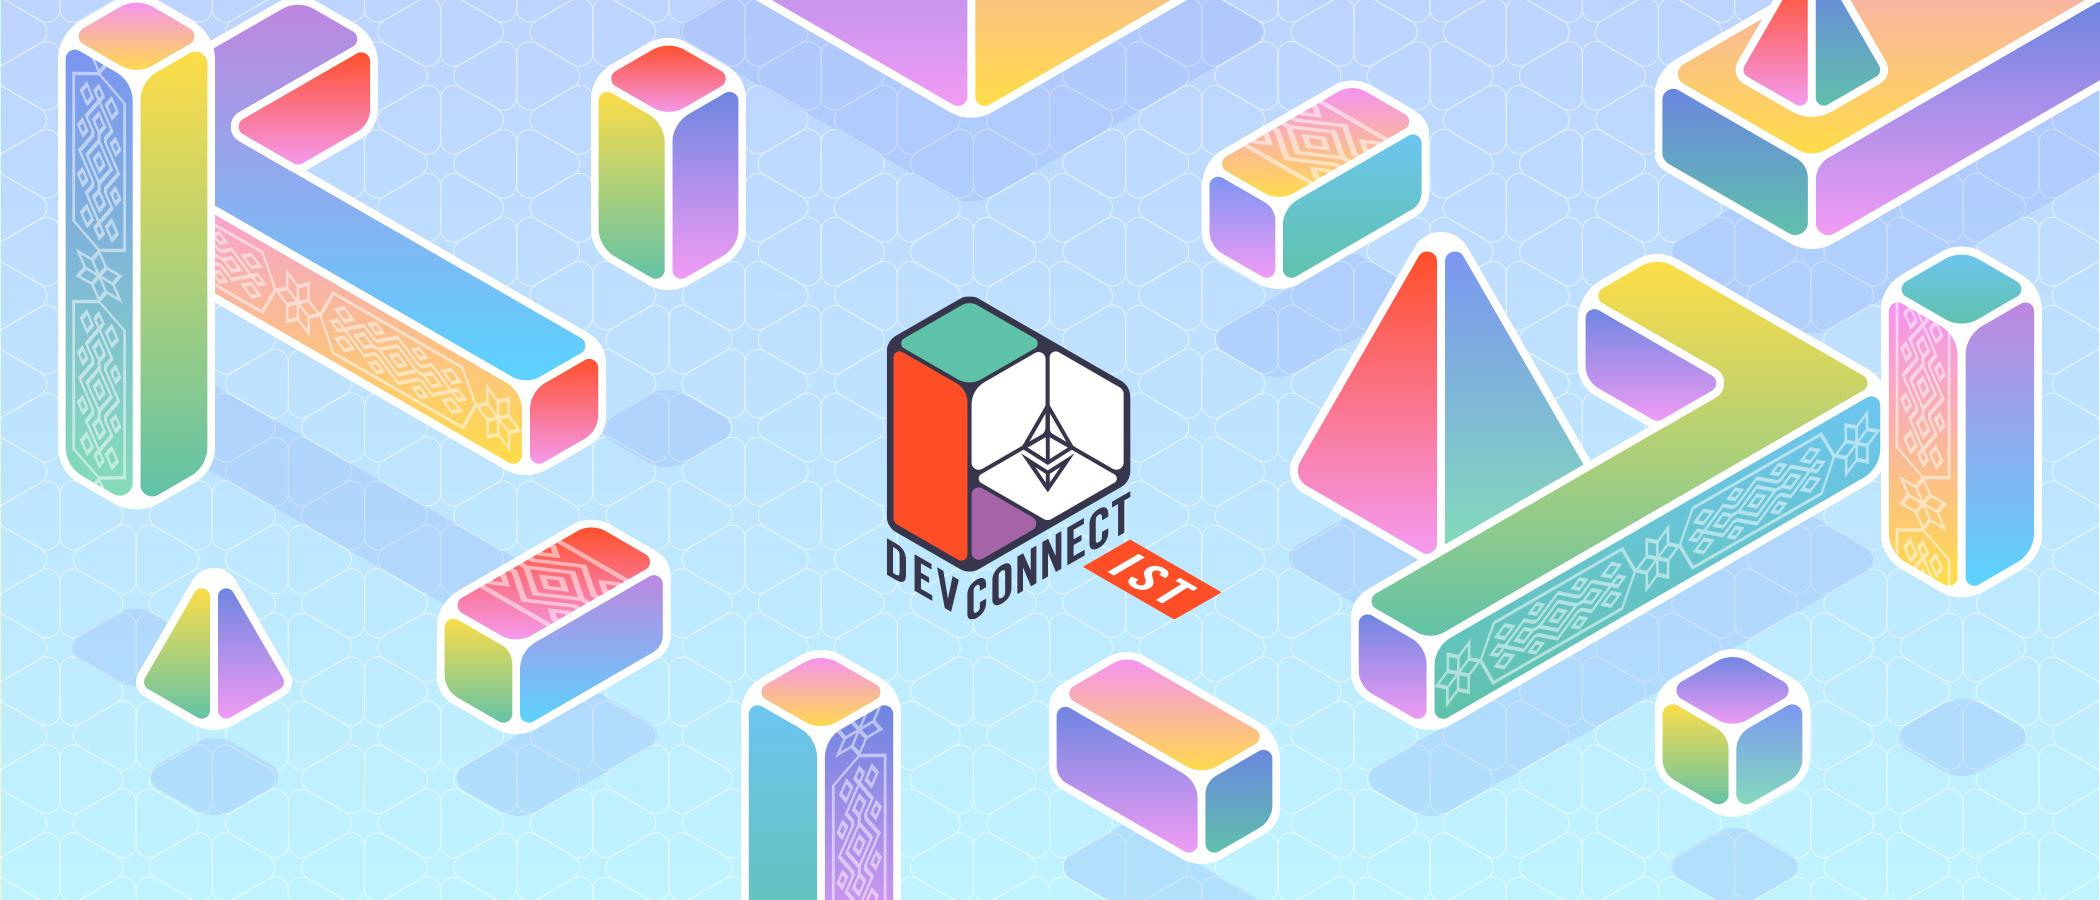 Update 2 - Preparing for Devconnect Events